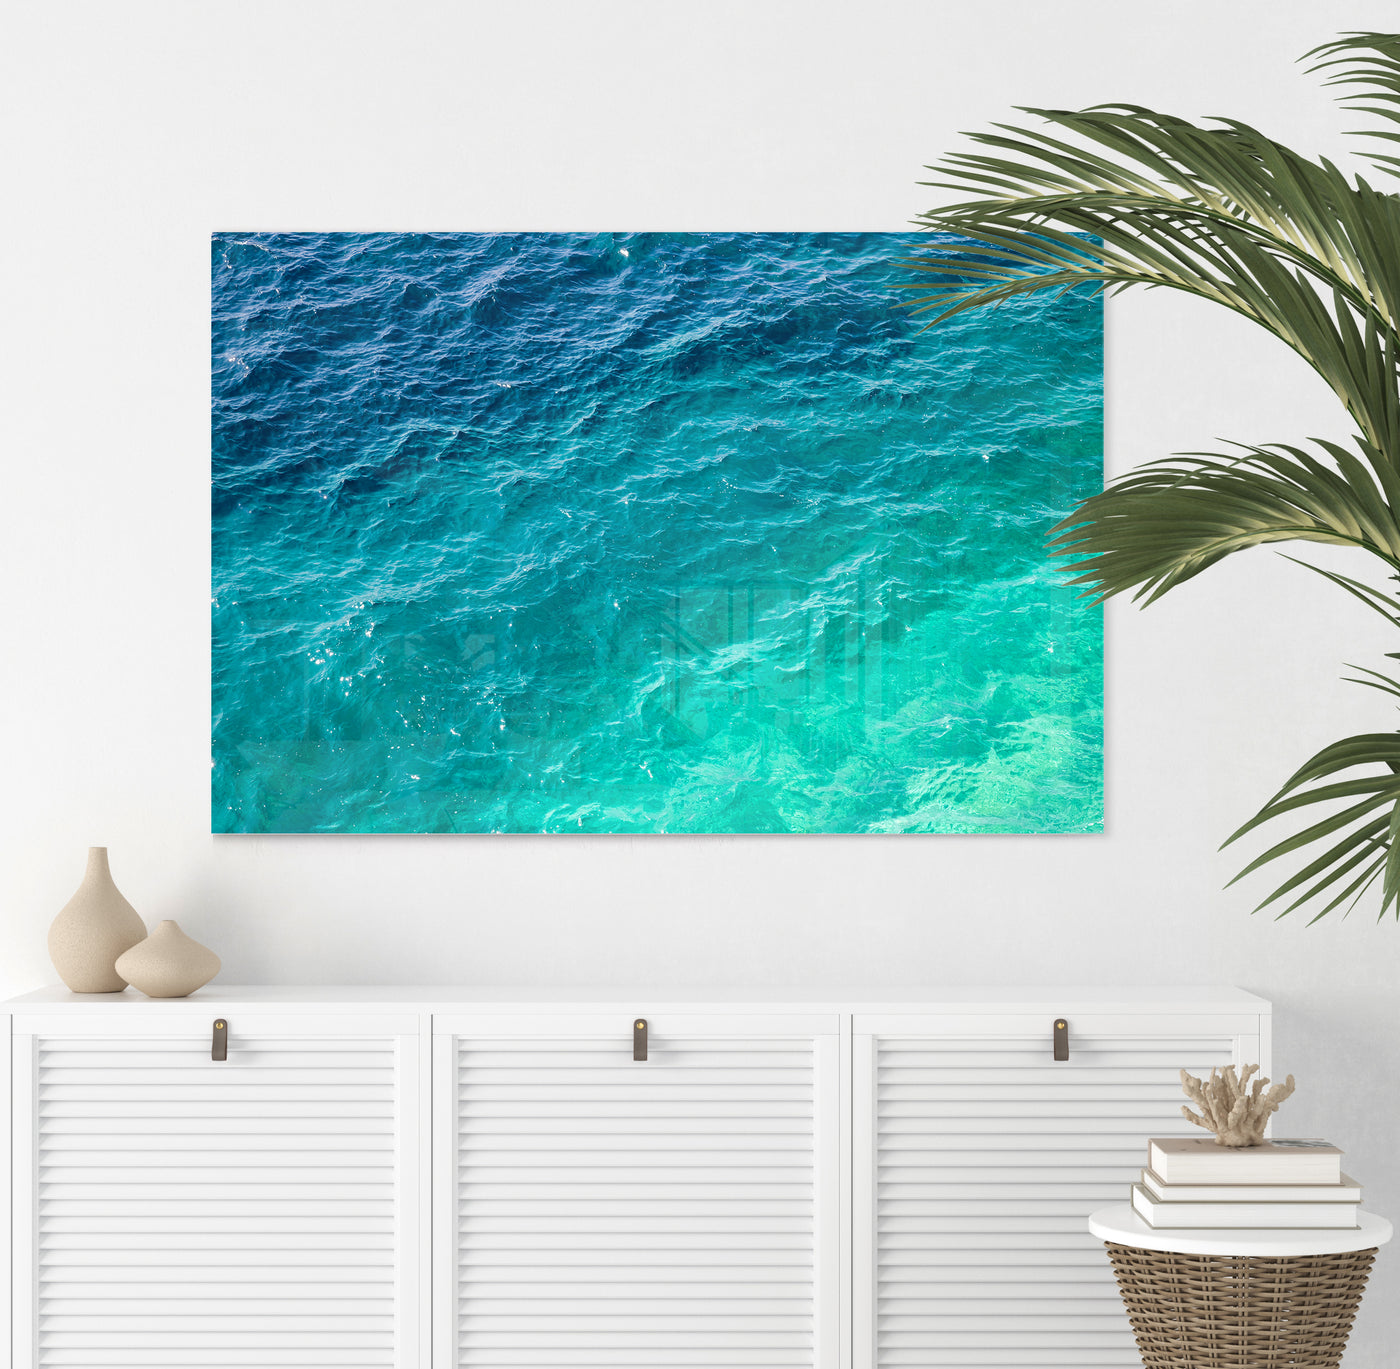 Mediterranean Shades of Teal No 1 - Oversized acrylic wall art by Cattie Coyle Photography